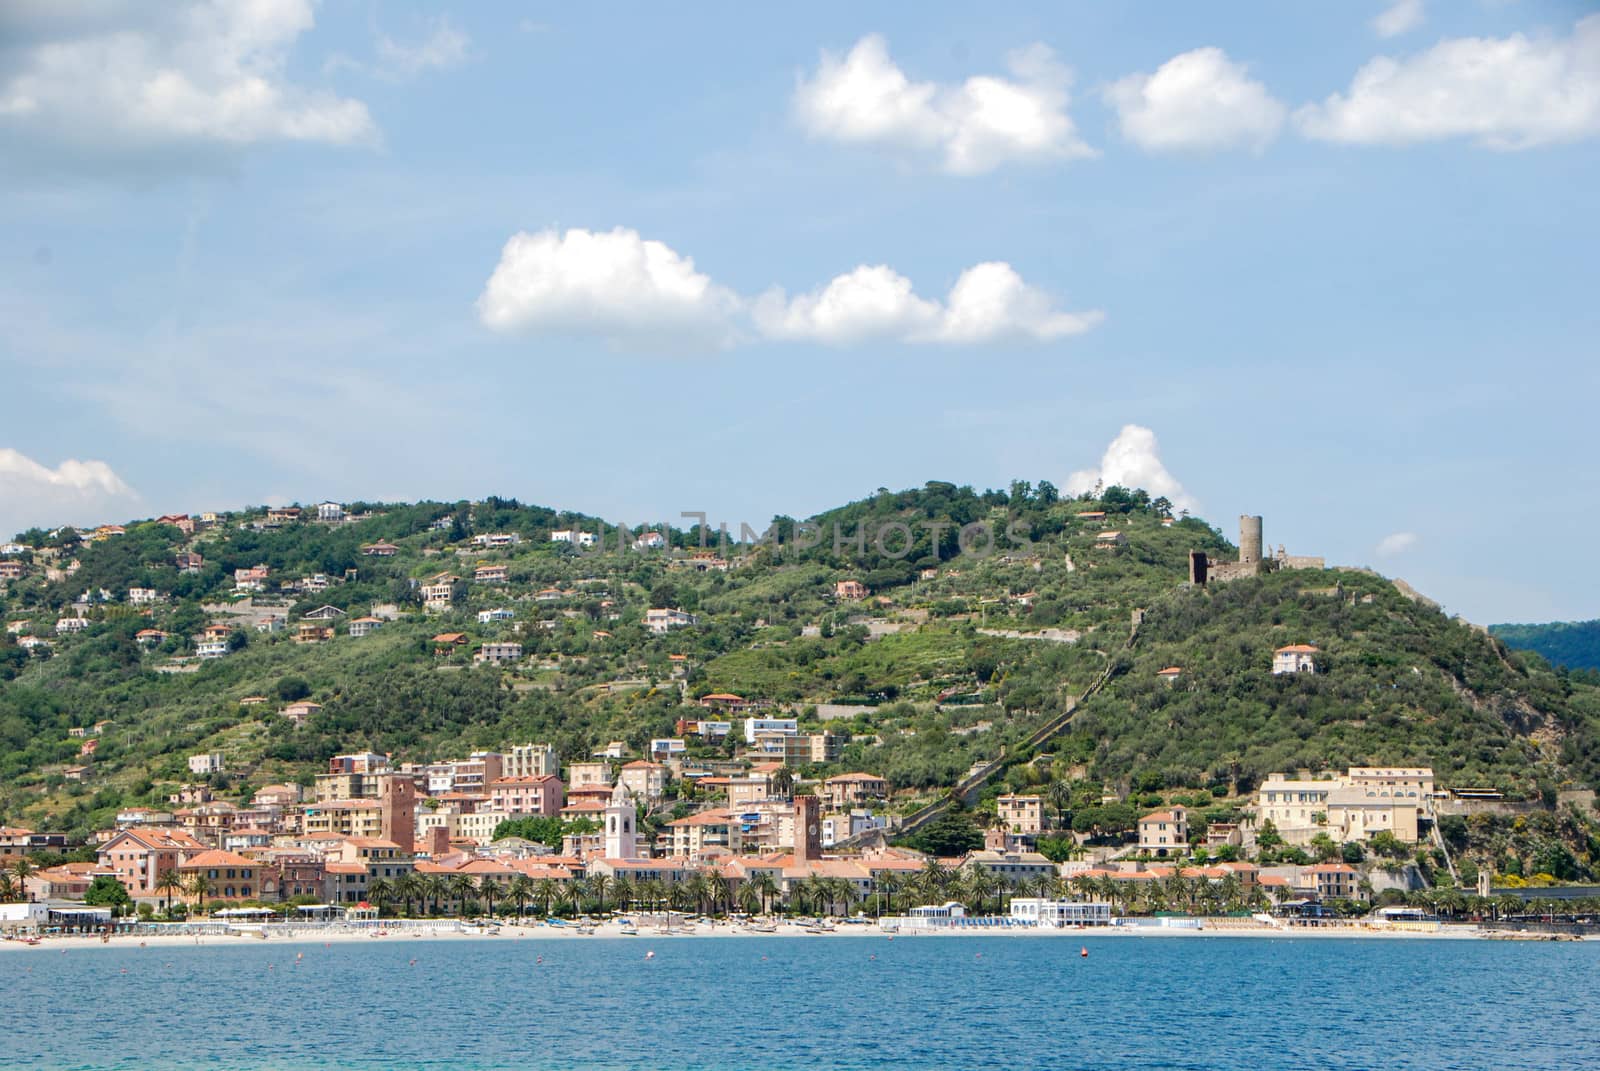 View of Noli from the beach, Liguria - Italy